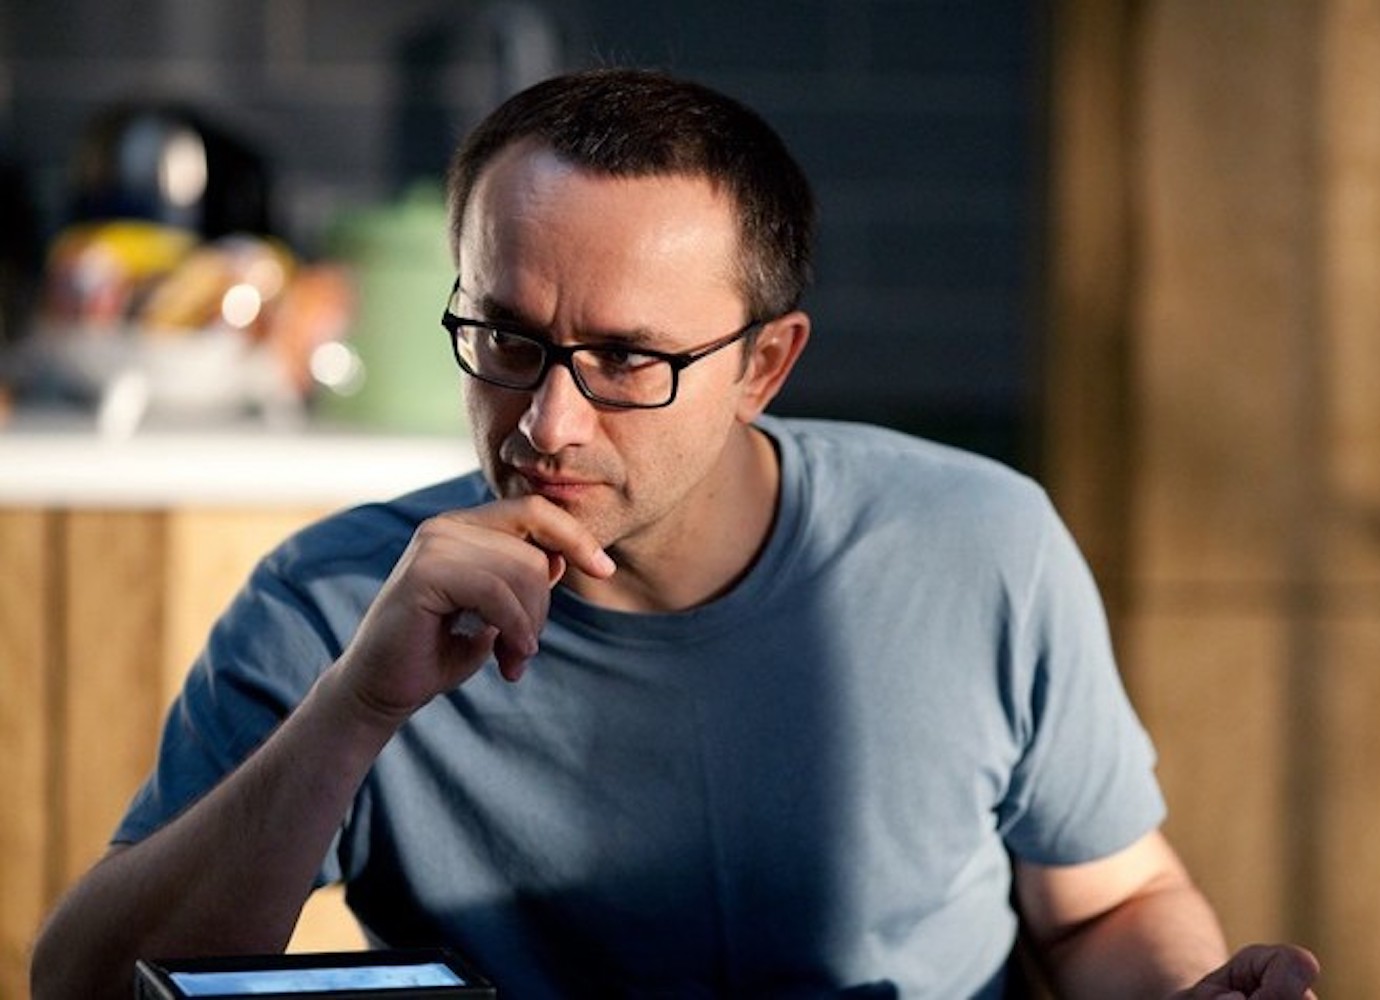 Russian director Andrei Zvyagintsev to release first English-language film